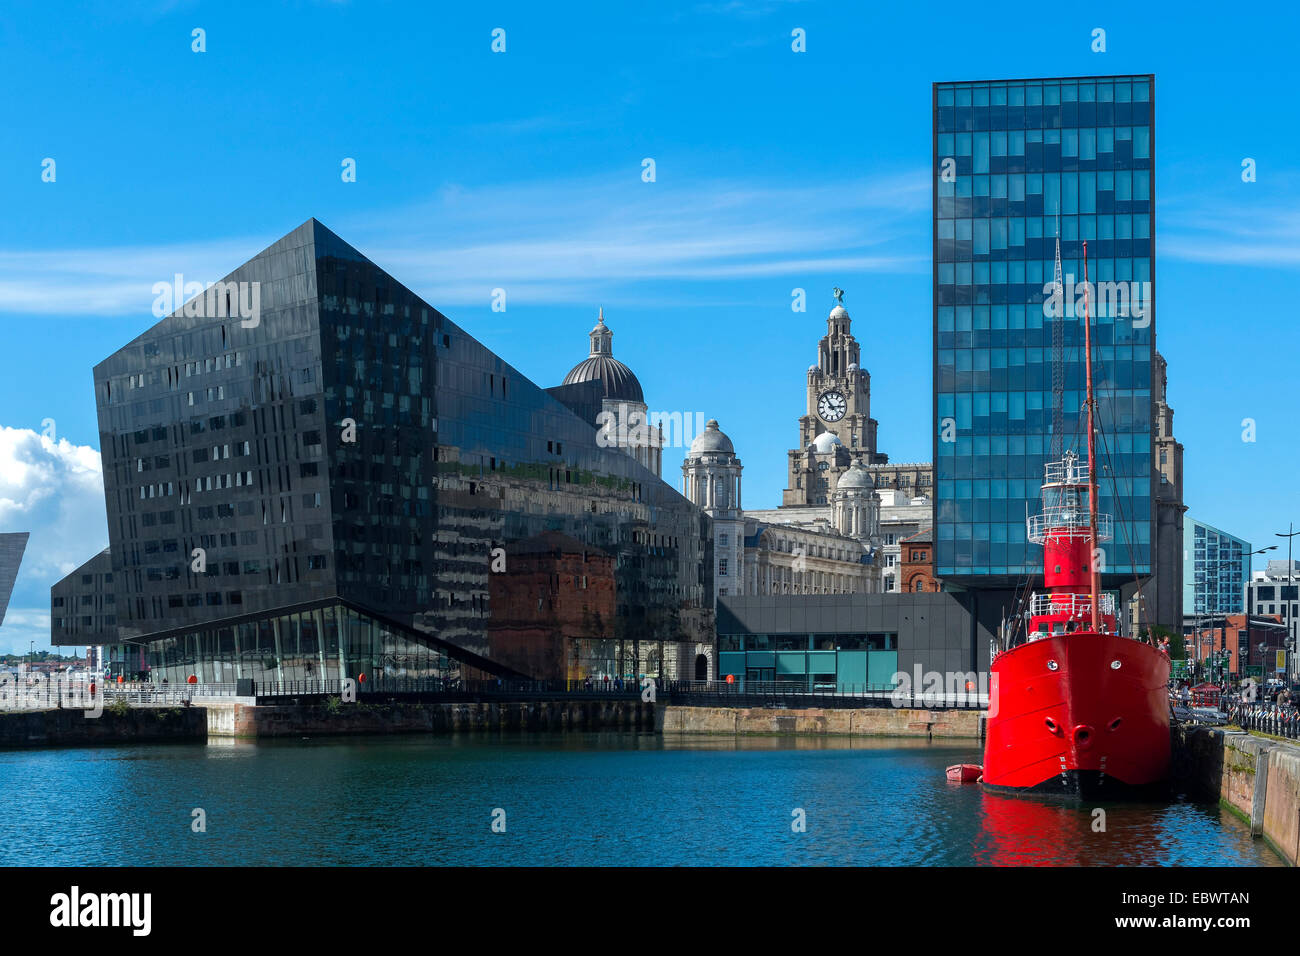 Canning Dock with the decommissioned lightship Planet at the port, Liverpool, Merseyside, England, United Kingdom Stock Photo